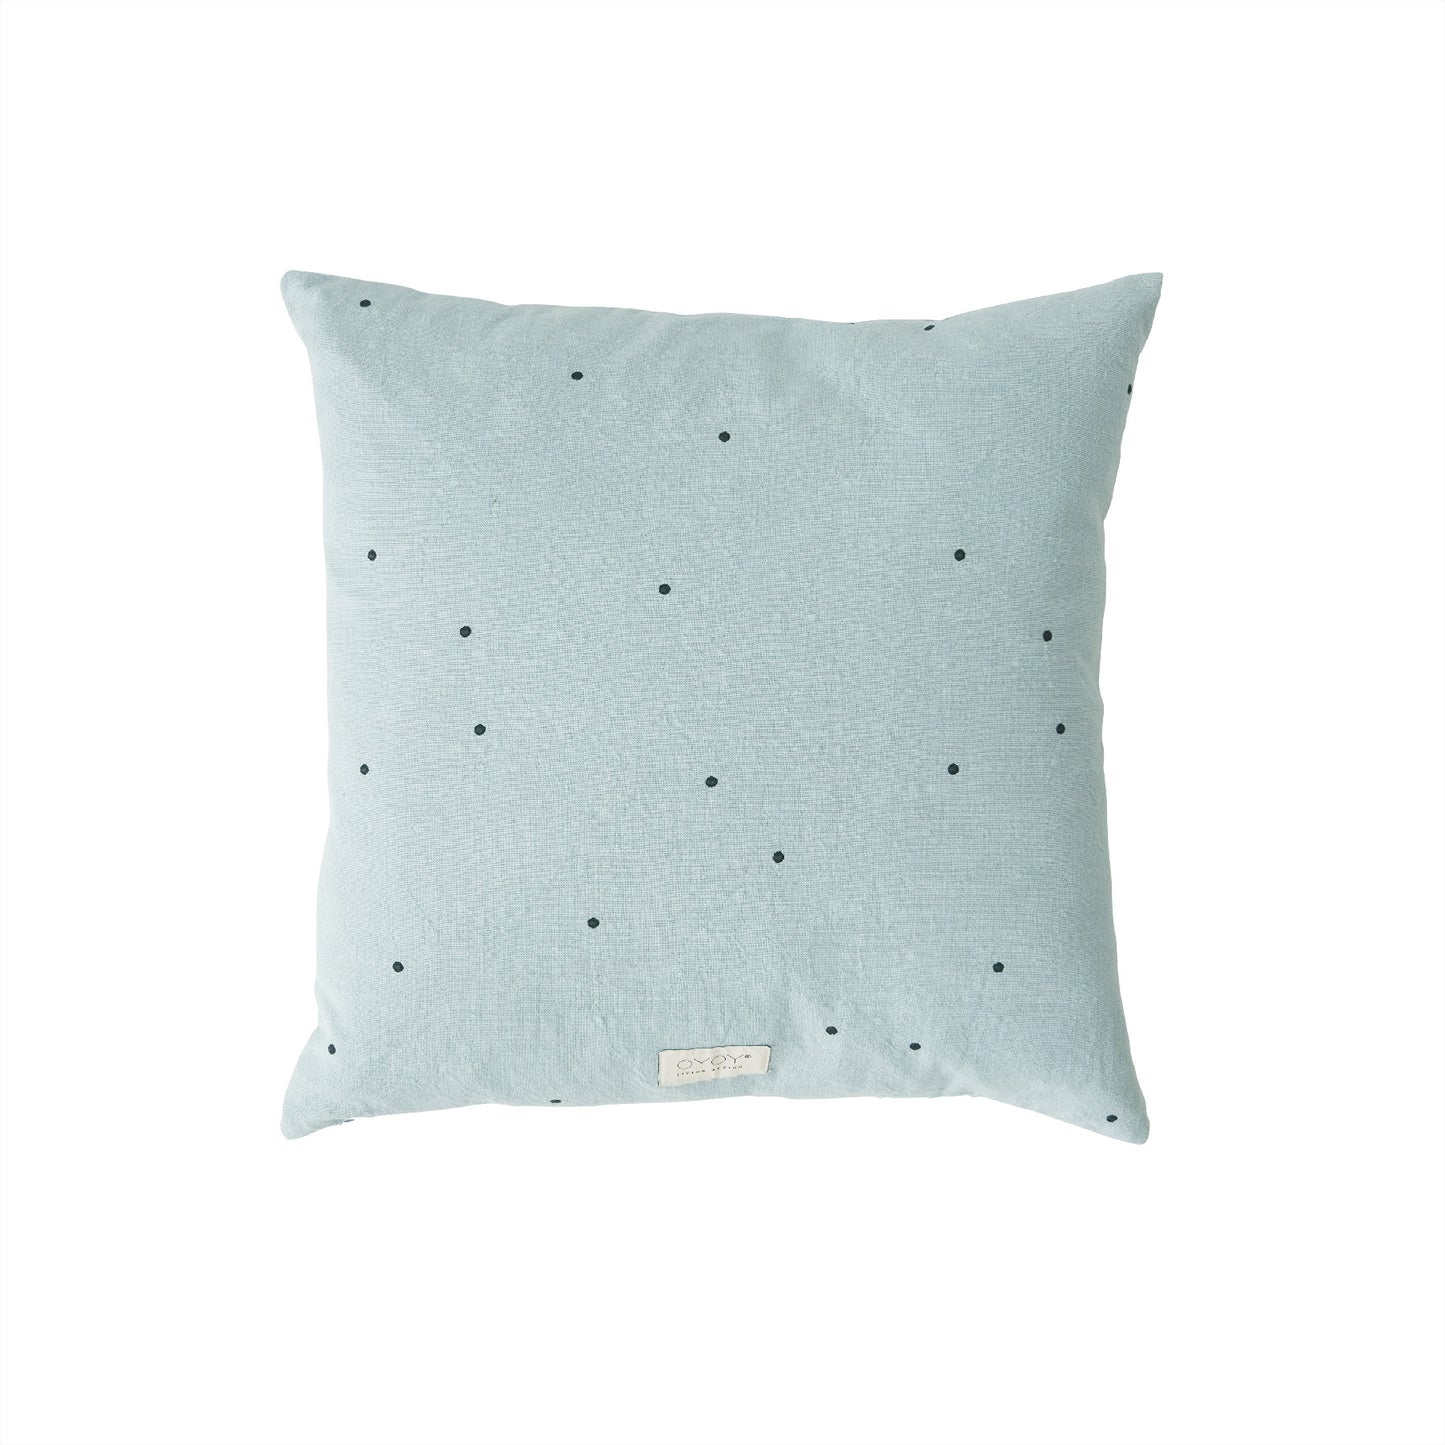 OYOY LIVING Kyoto Dot Cushion Cover Square Cushion Cover 608 Dusty Blue